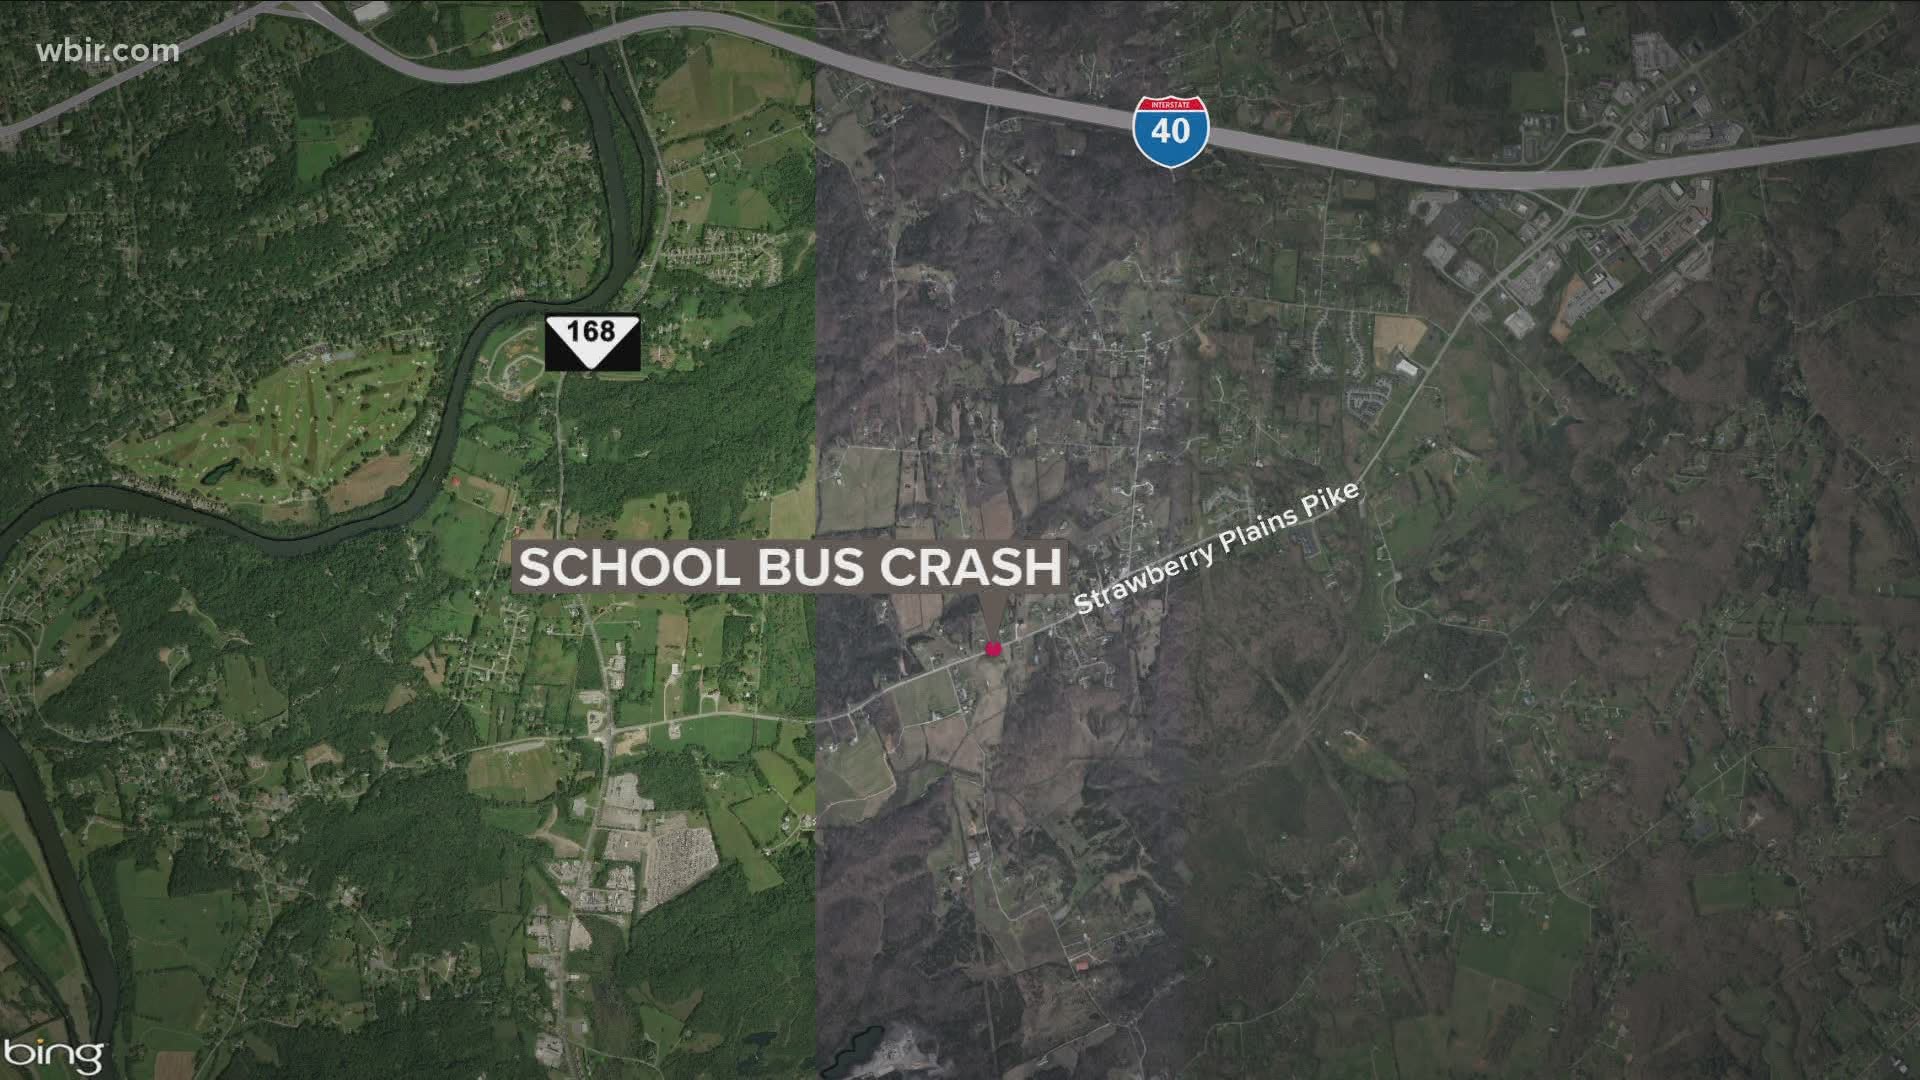 The sheriff's office said it happened just after 4 p.m.
About 60 students were on board at the time.